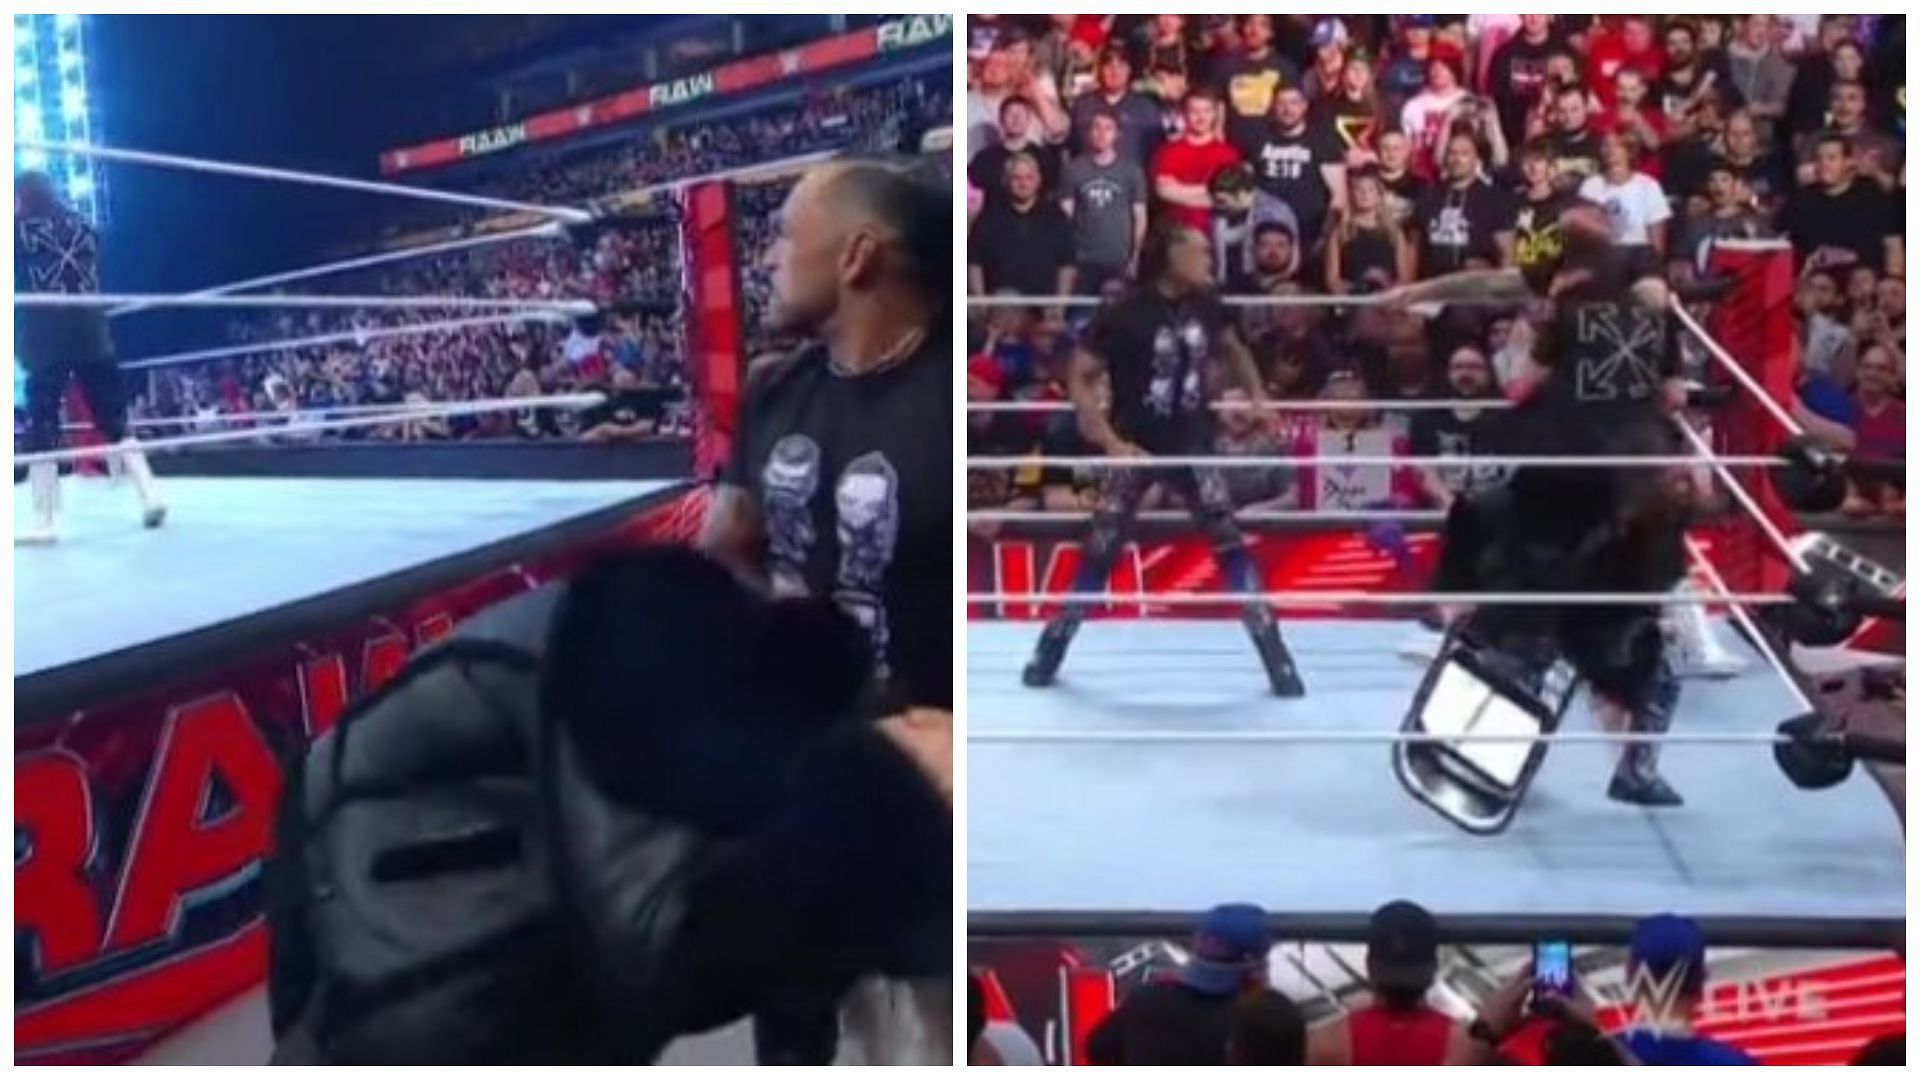 The actions from Judgment Day members led to brawl on WWE RAW.